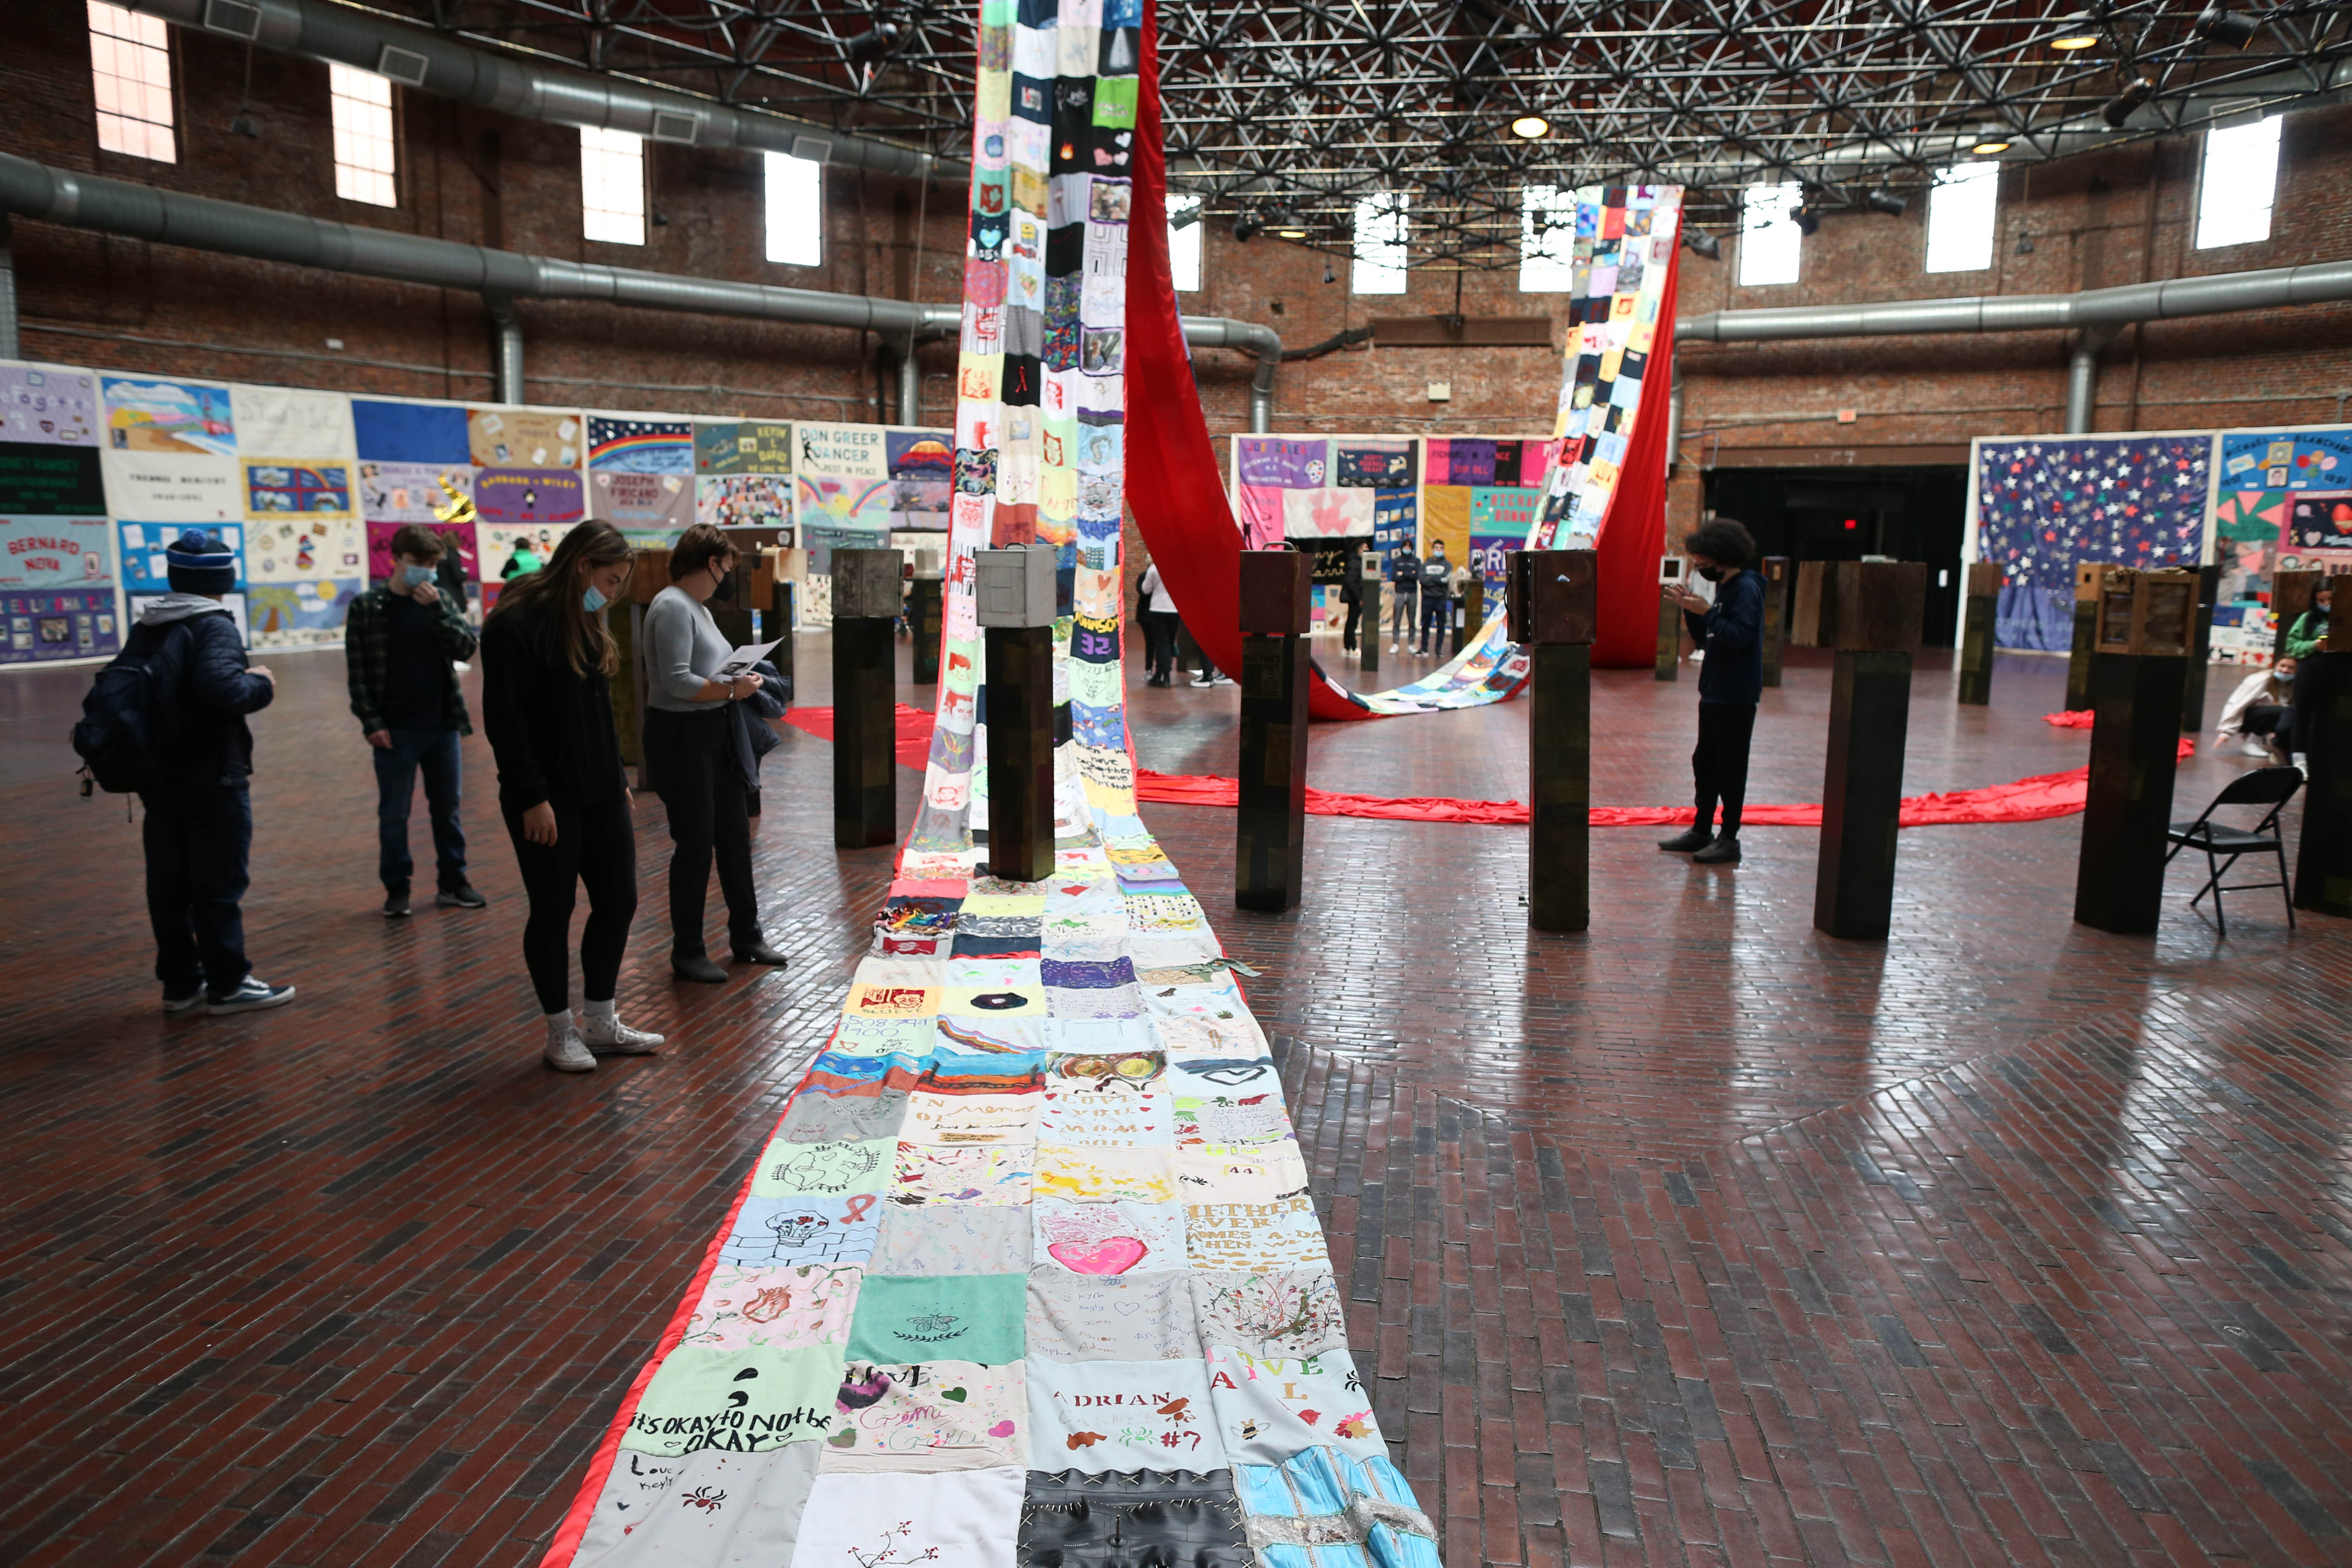 As part of the 30th installation in honor of Days Without Art, the association SPOKE has produced a new quilt, presented here, composed of samplers submitted by the public to honor what touched them during the "several pandemics" the last two years. 